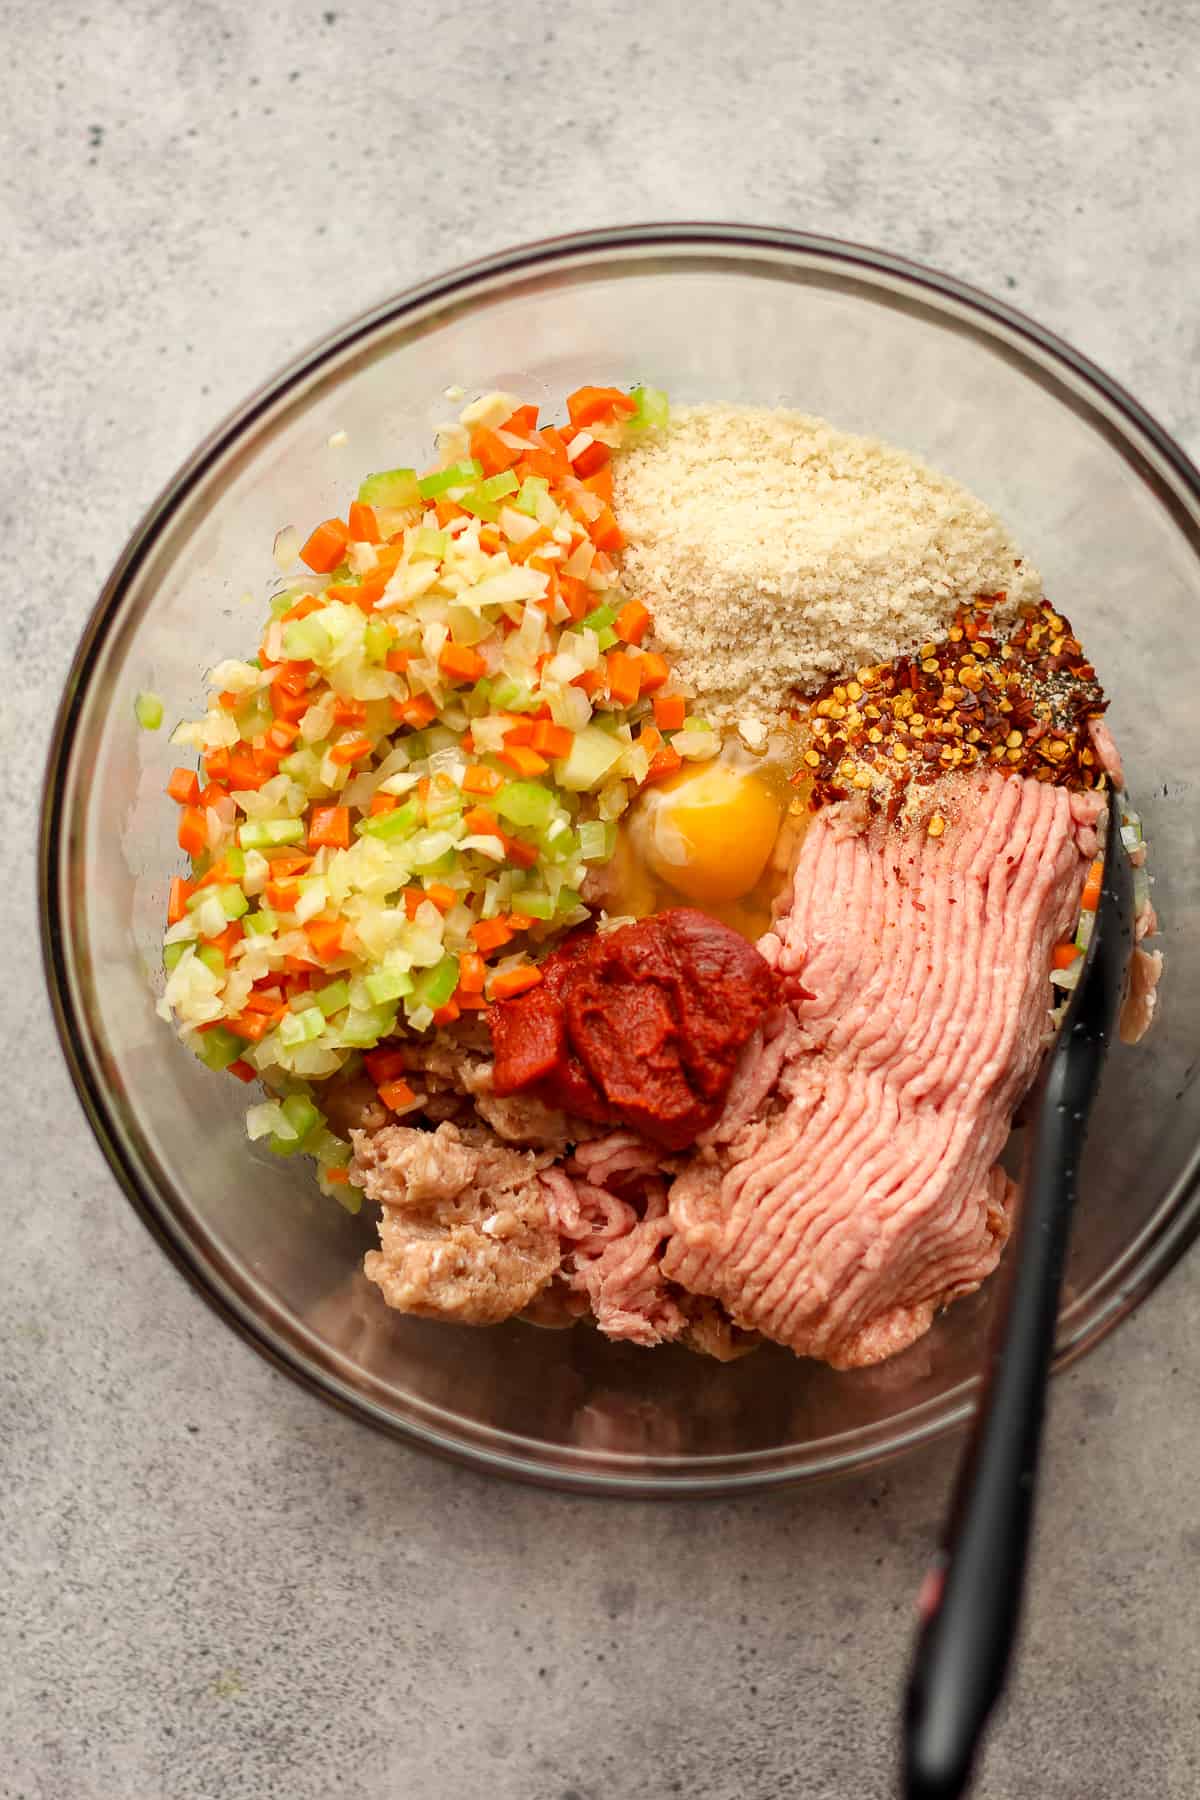 A bowl of the meatloaf ingredients before combining.